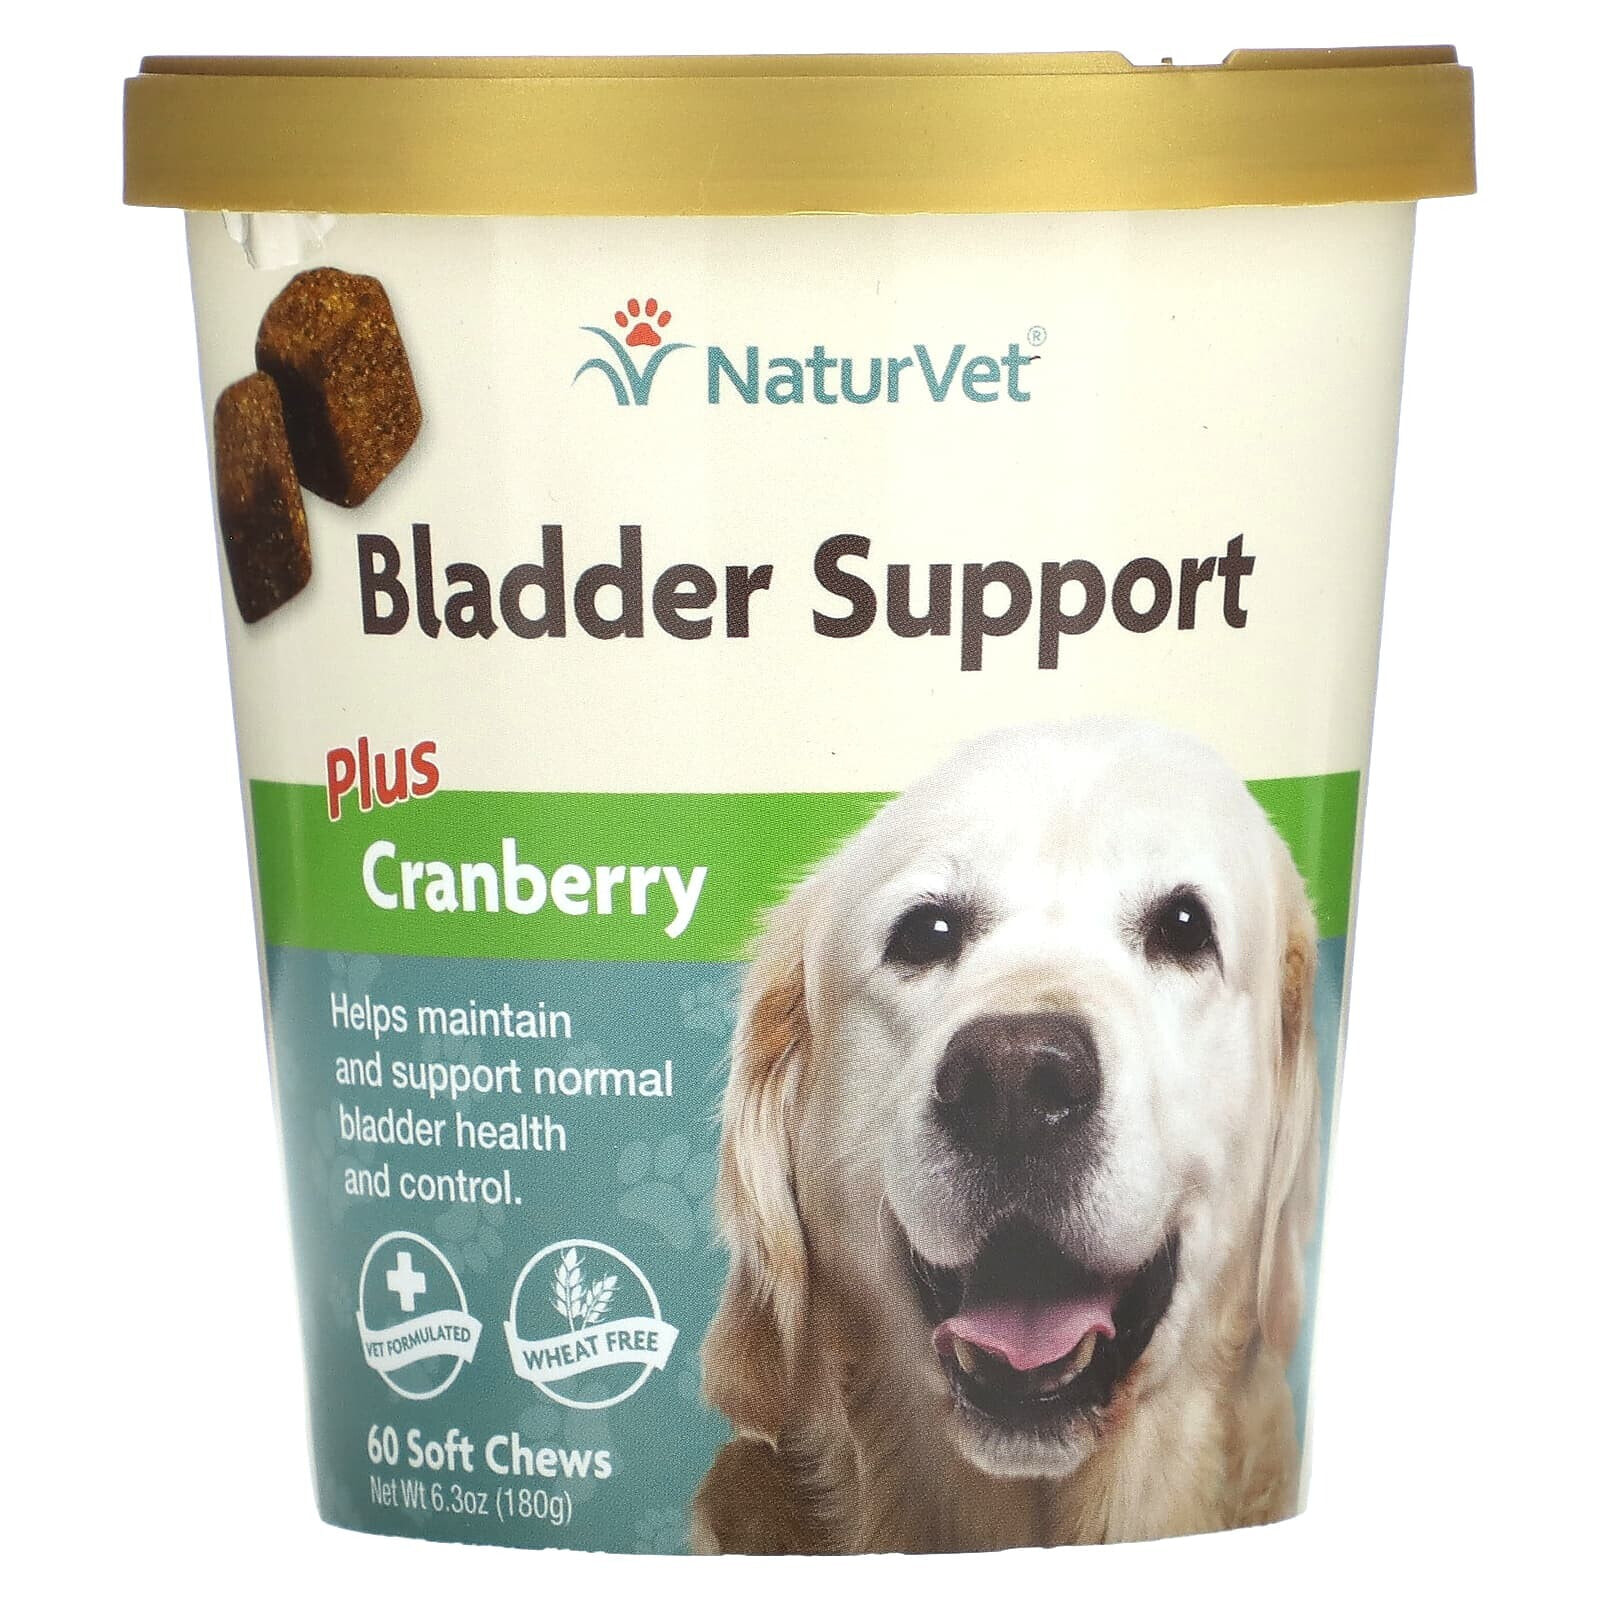 Bladder Support Plus Cranberry, For Dogs, 60 Soft Chews, 6.3 oz (180 g)